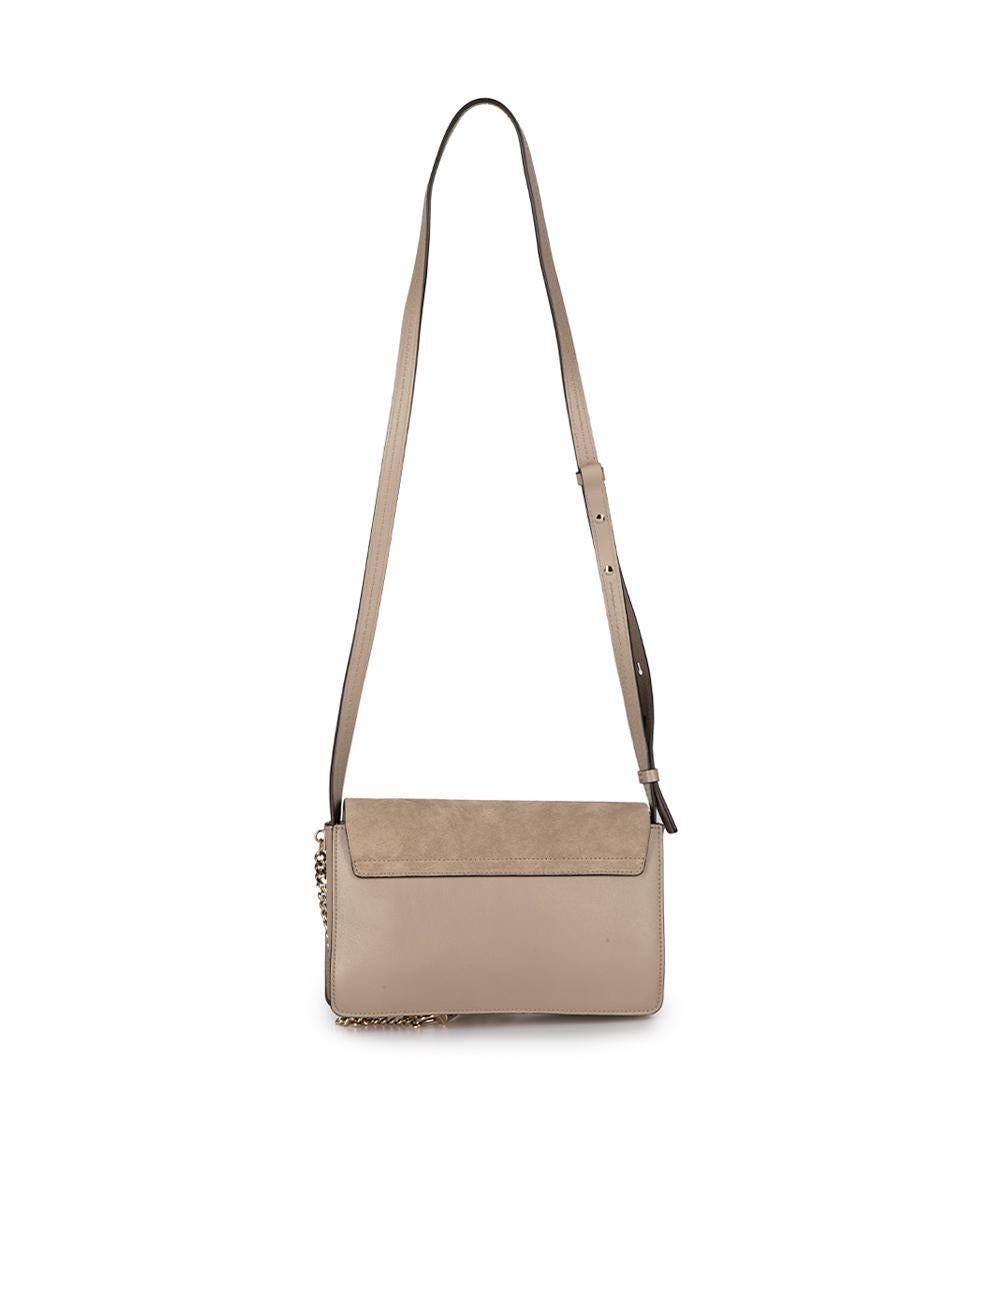 Chloé Women's Taupe Leather Calfskin Faye Small Shoulder Bag In New Condition For Sale In London, GB